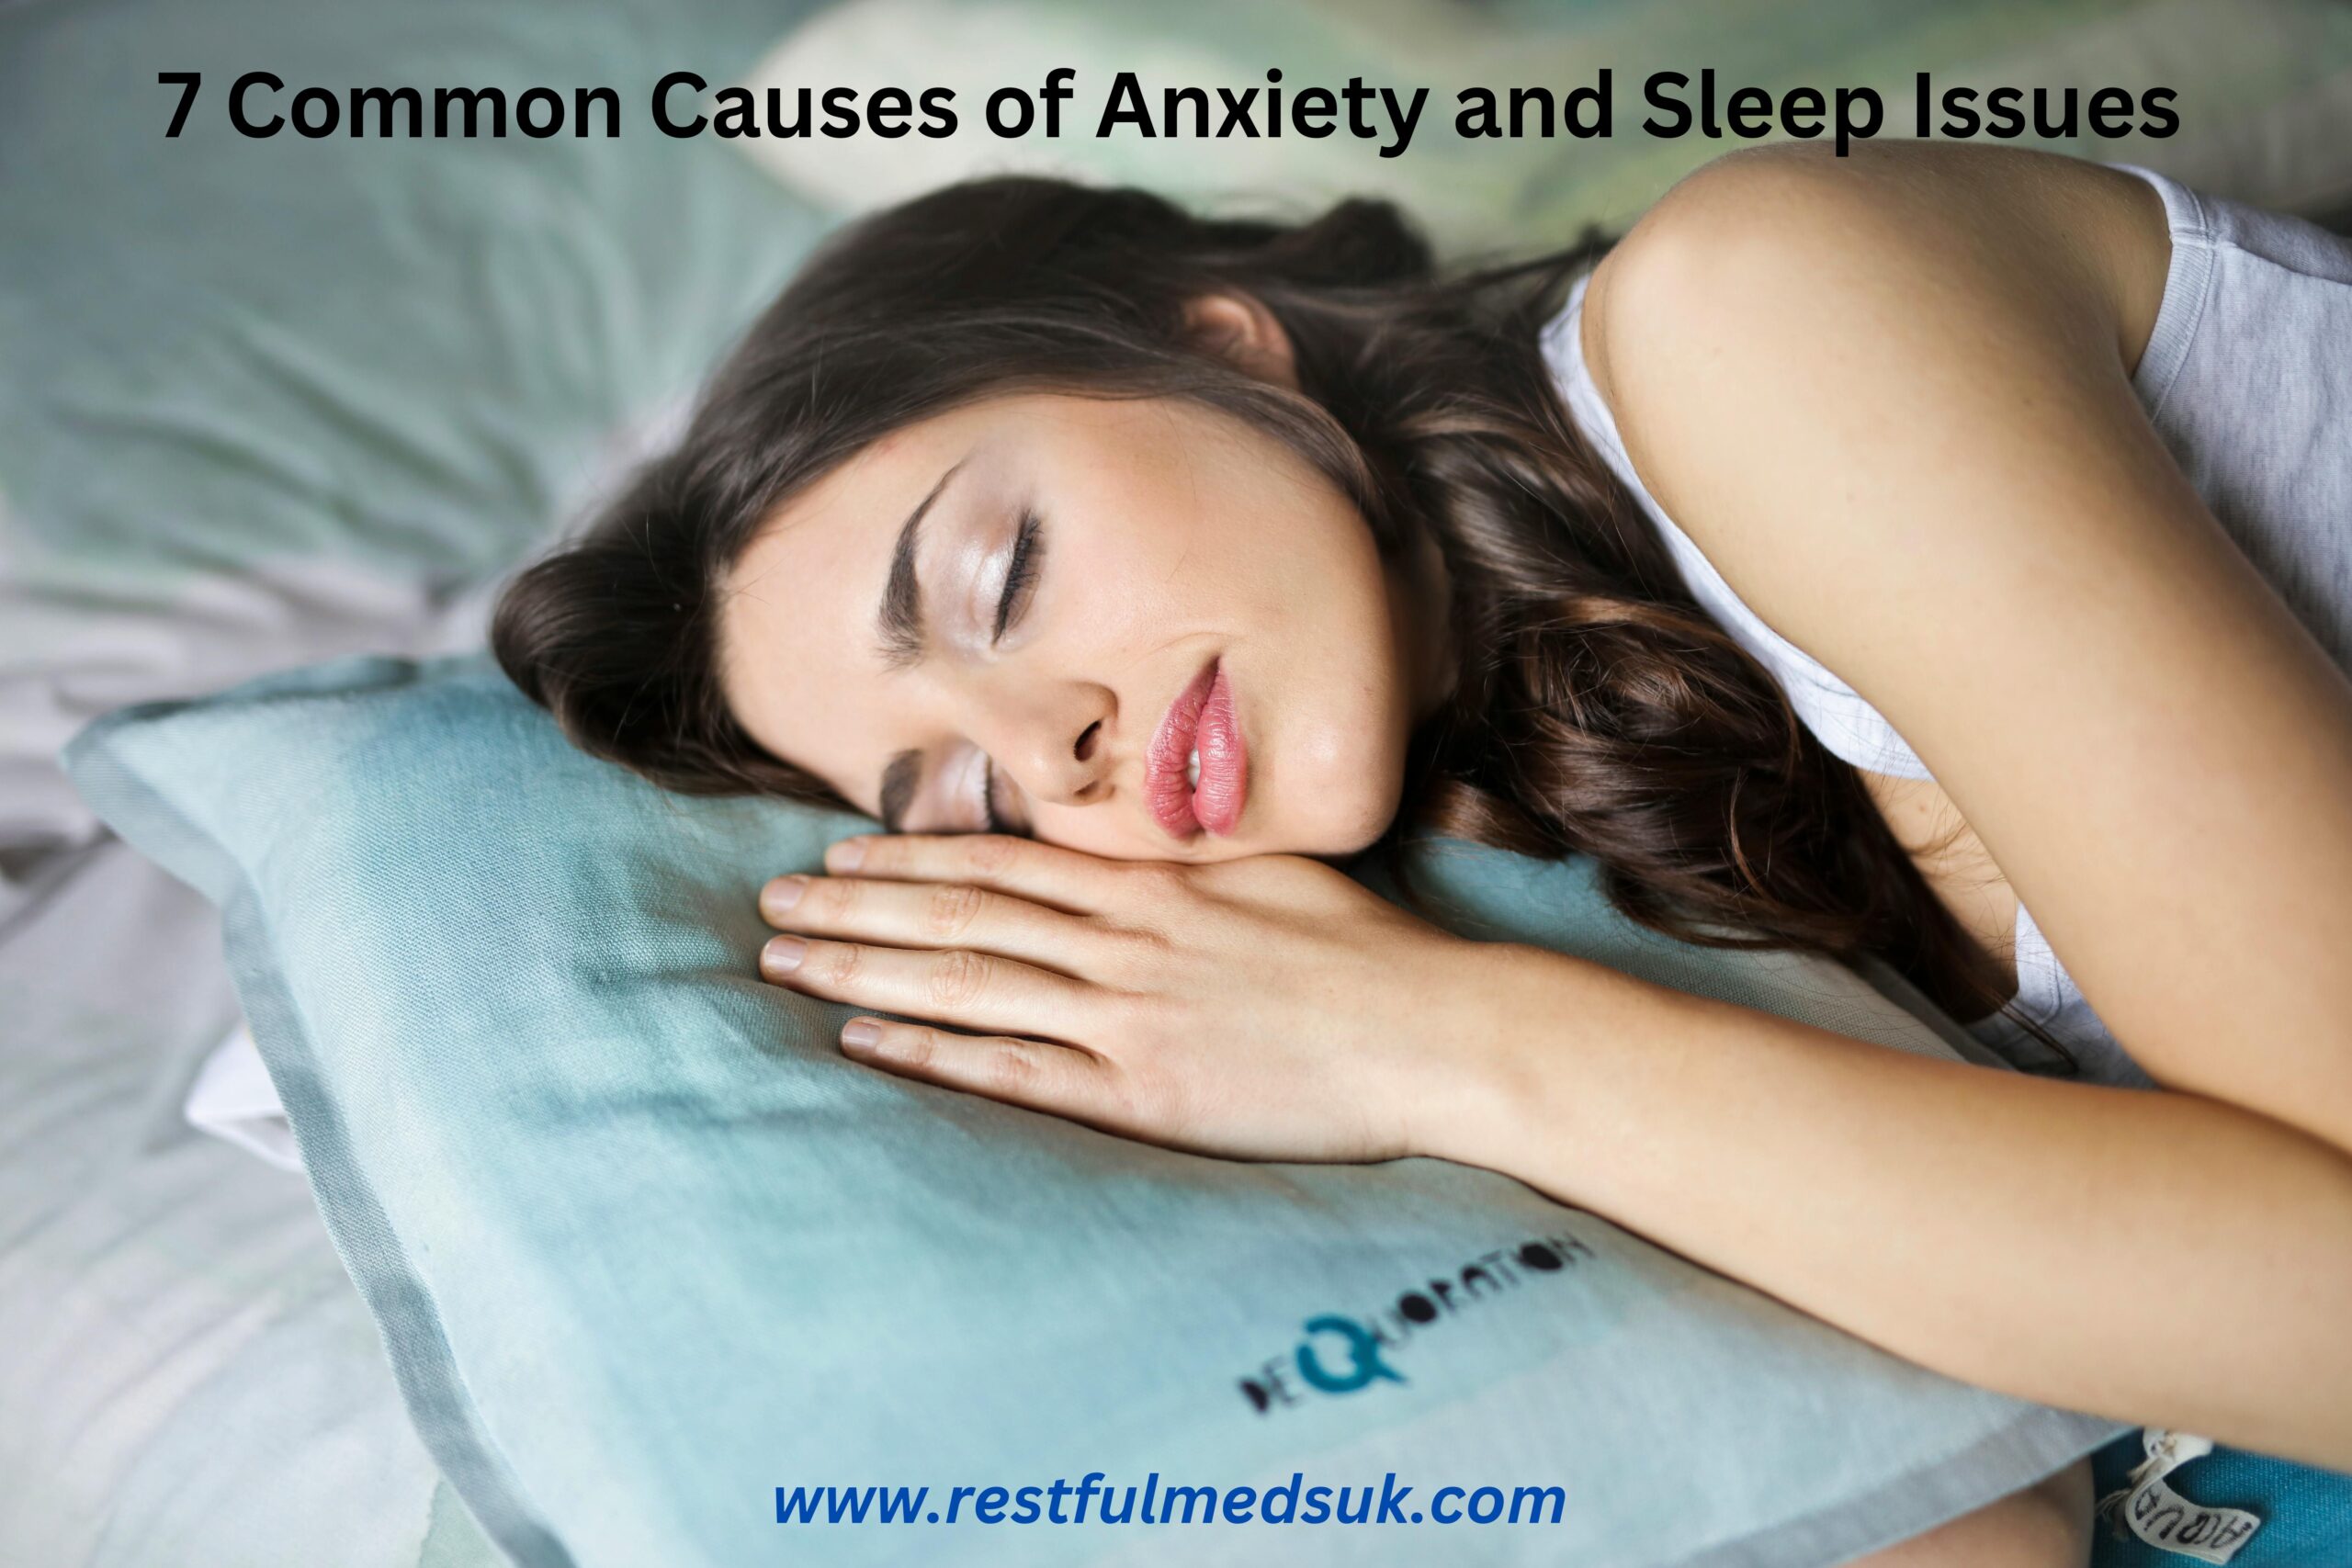 7 Common Causes of Anxiety and Sleep Issues